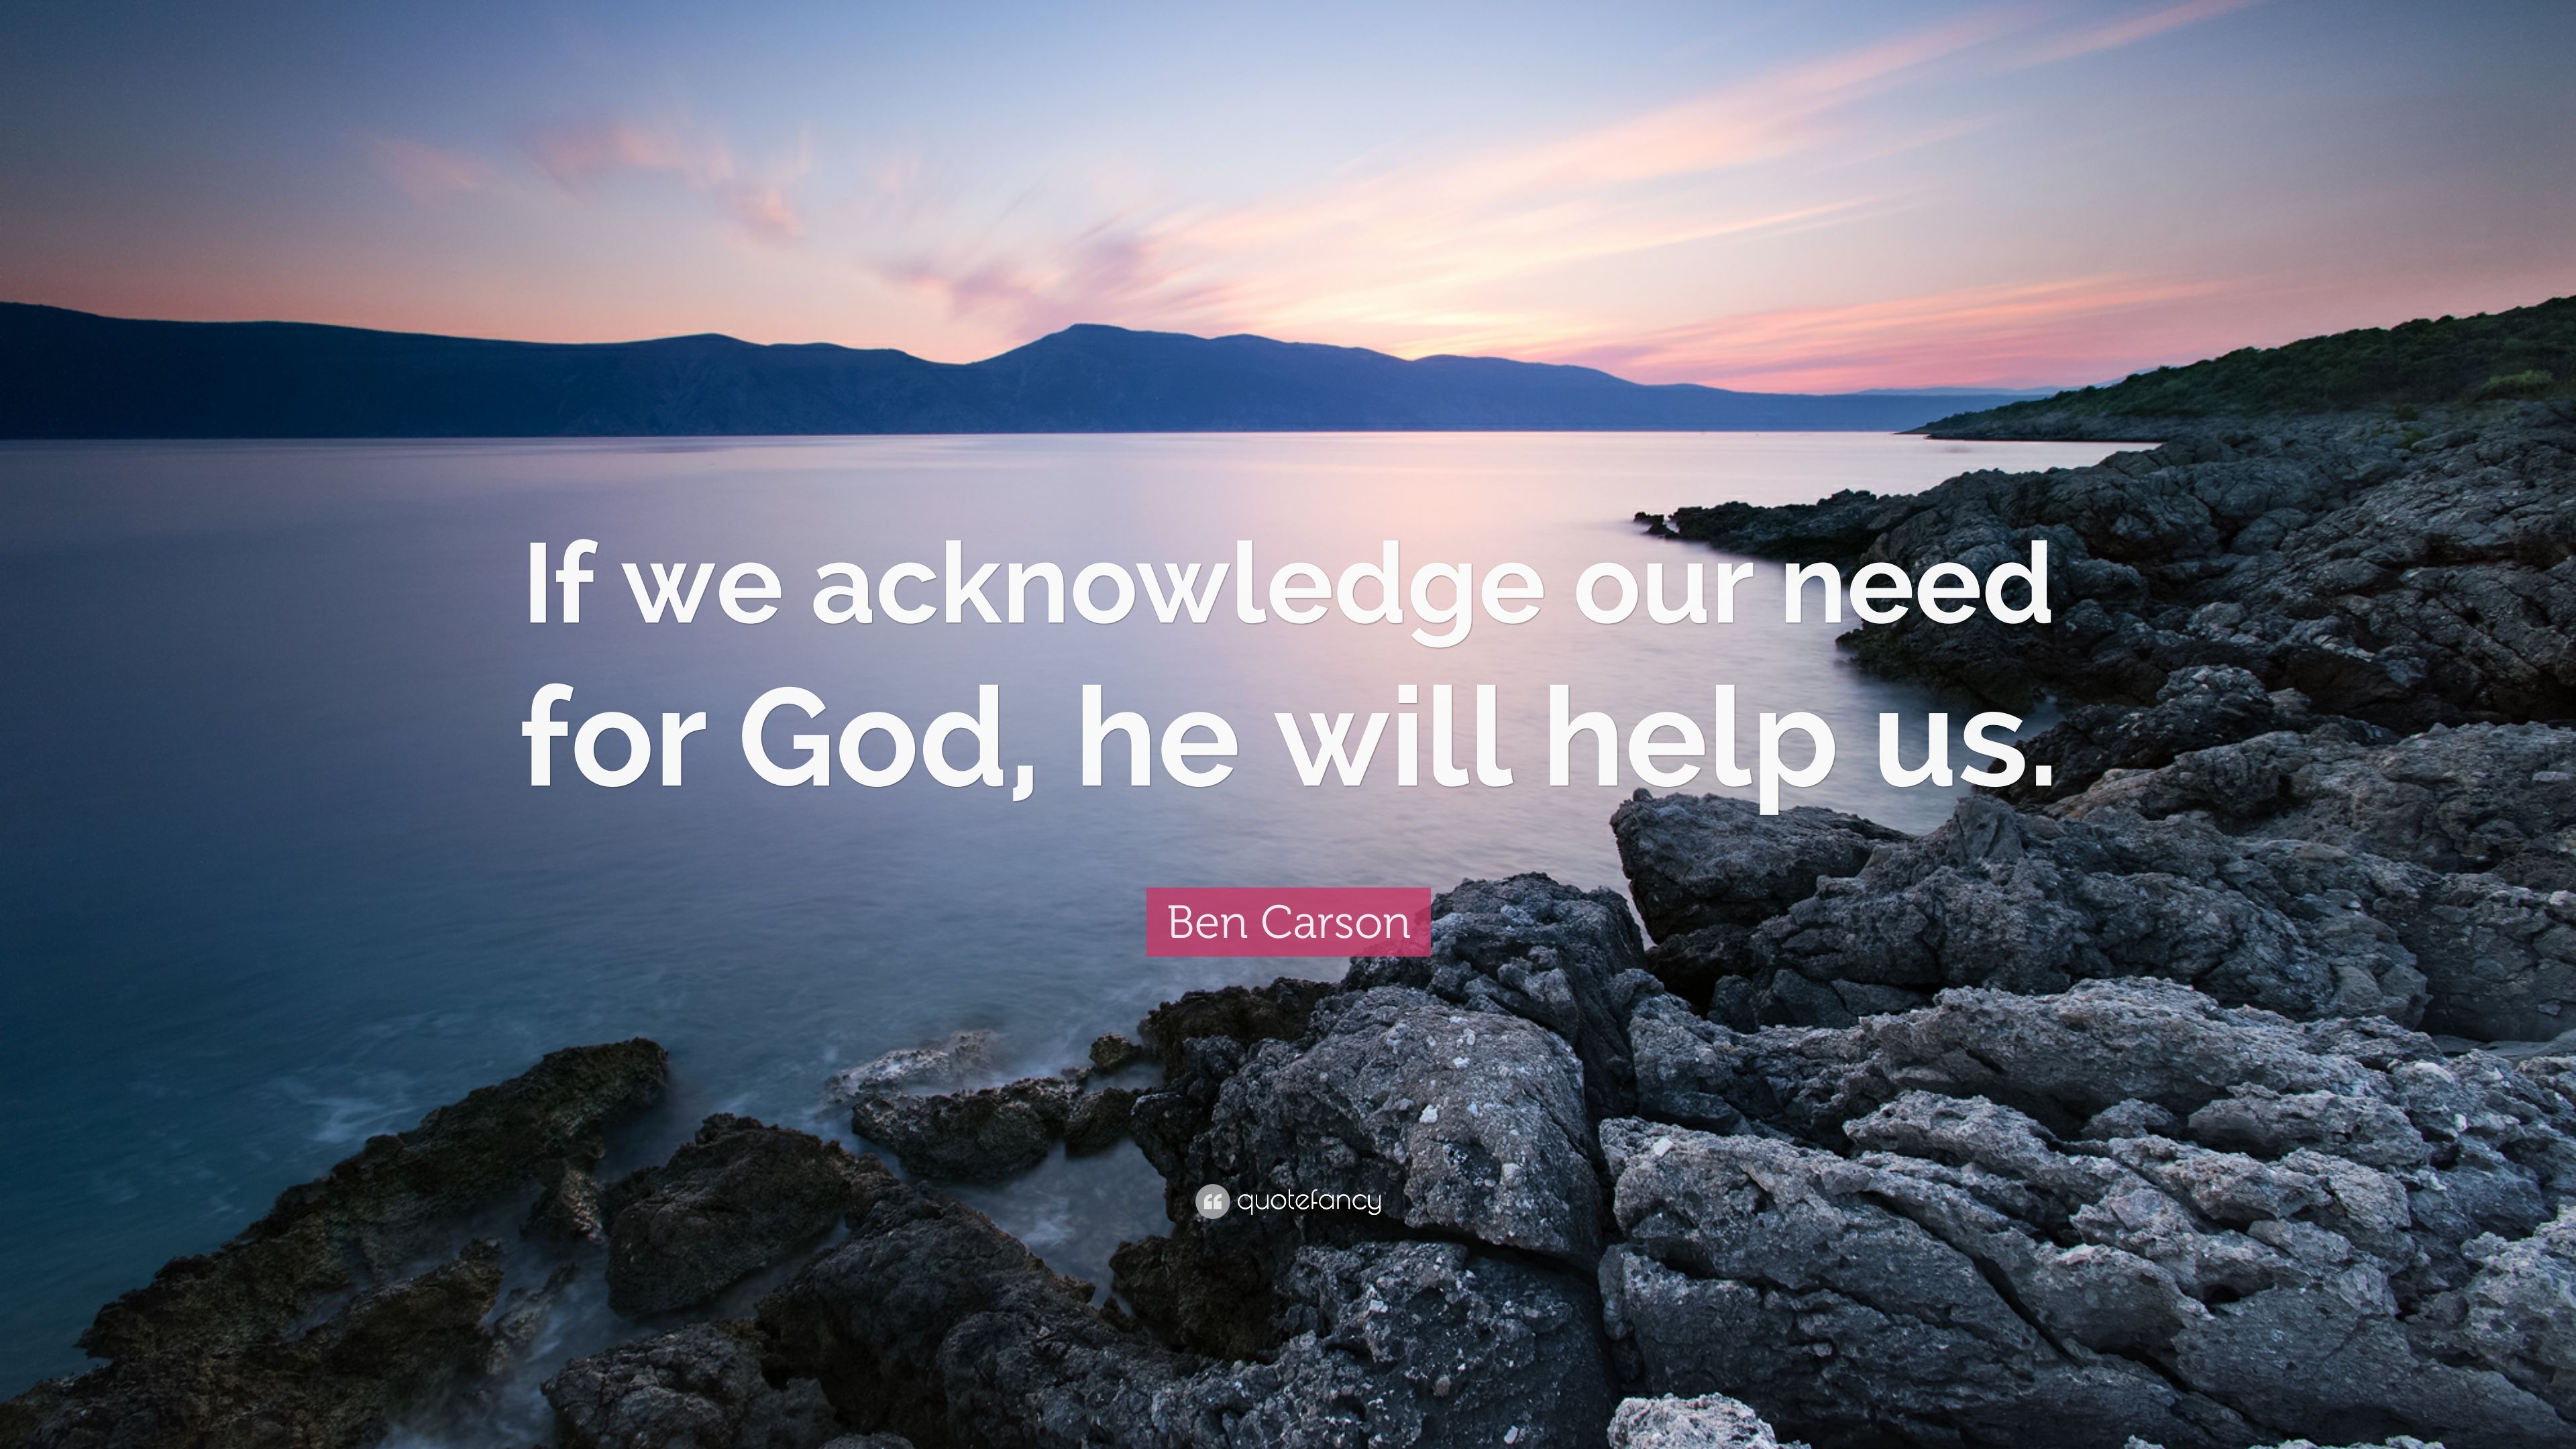 Ben Carson Quote: “If we acknowledge our need for God, he will help us.” (12 wallpaper)